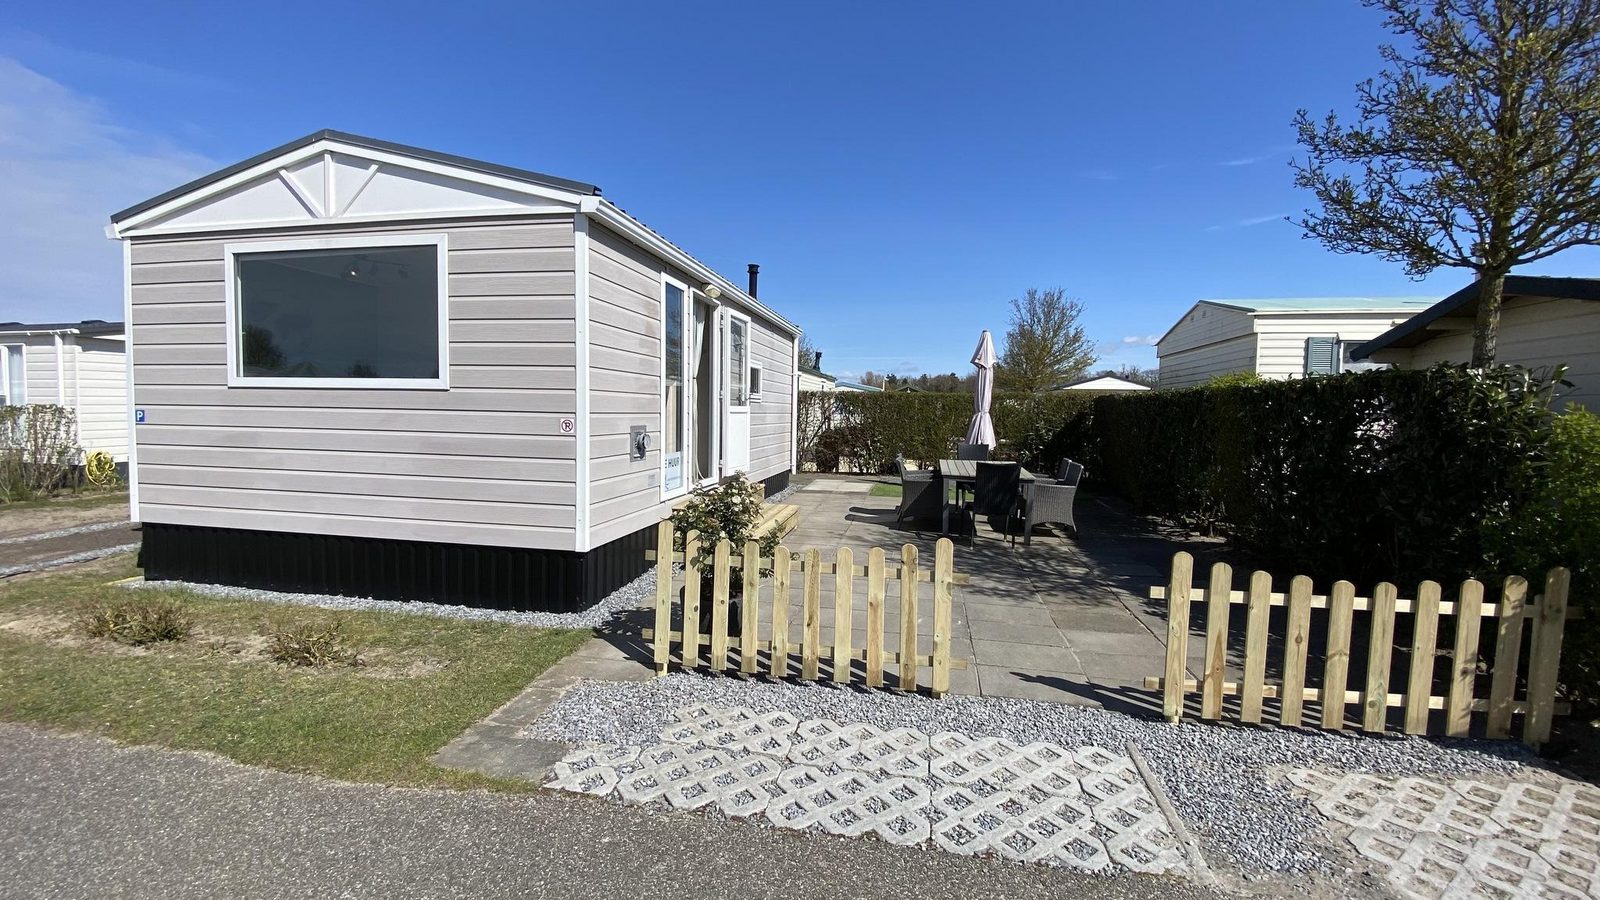 VZ466 Mobile home Duif 258 in Renesse